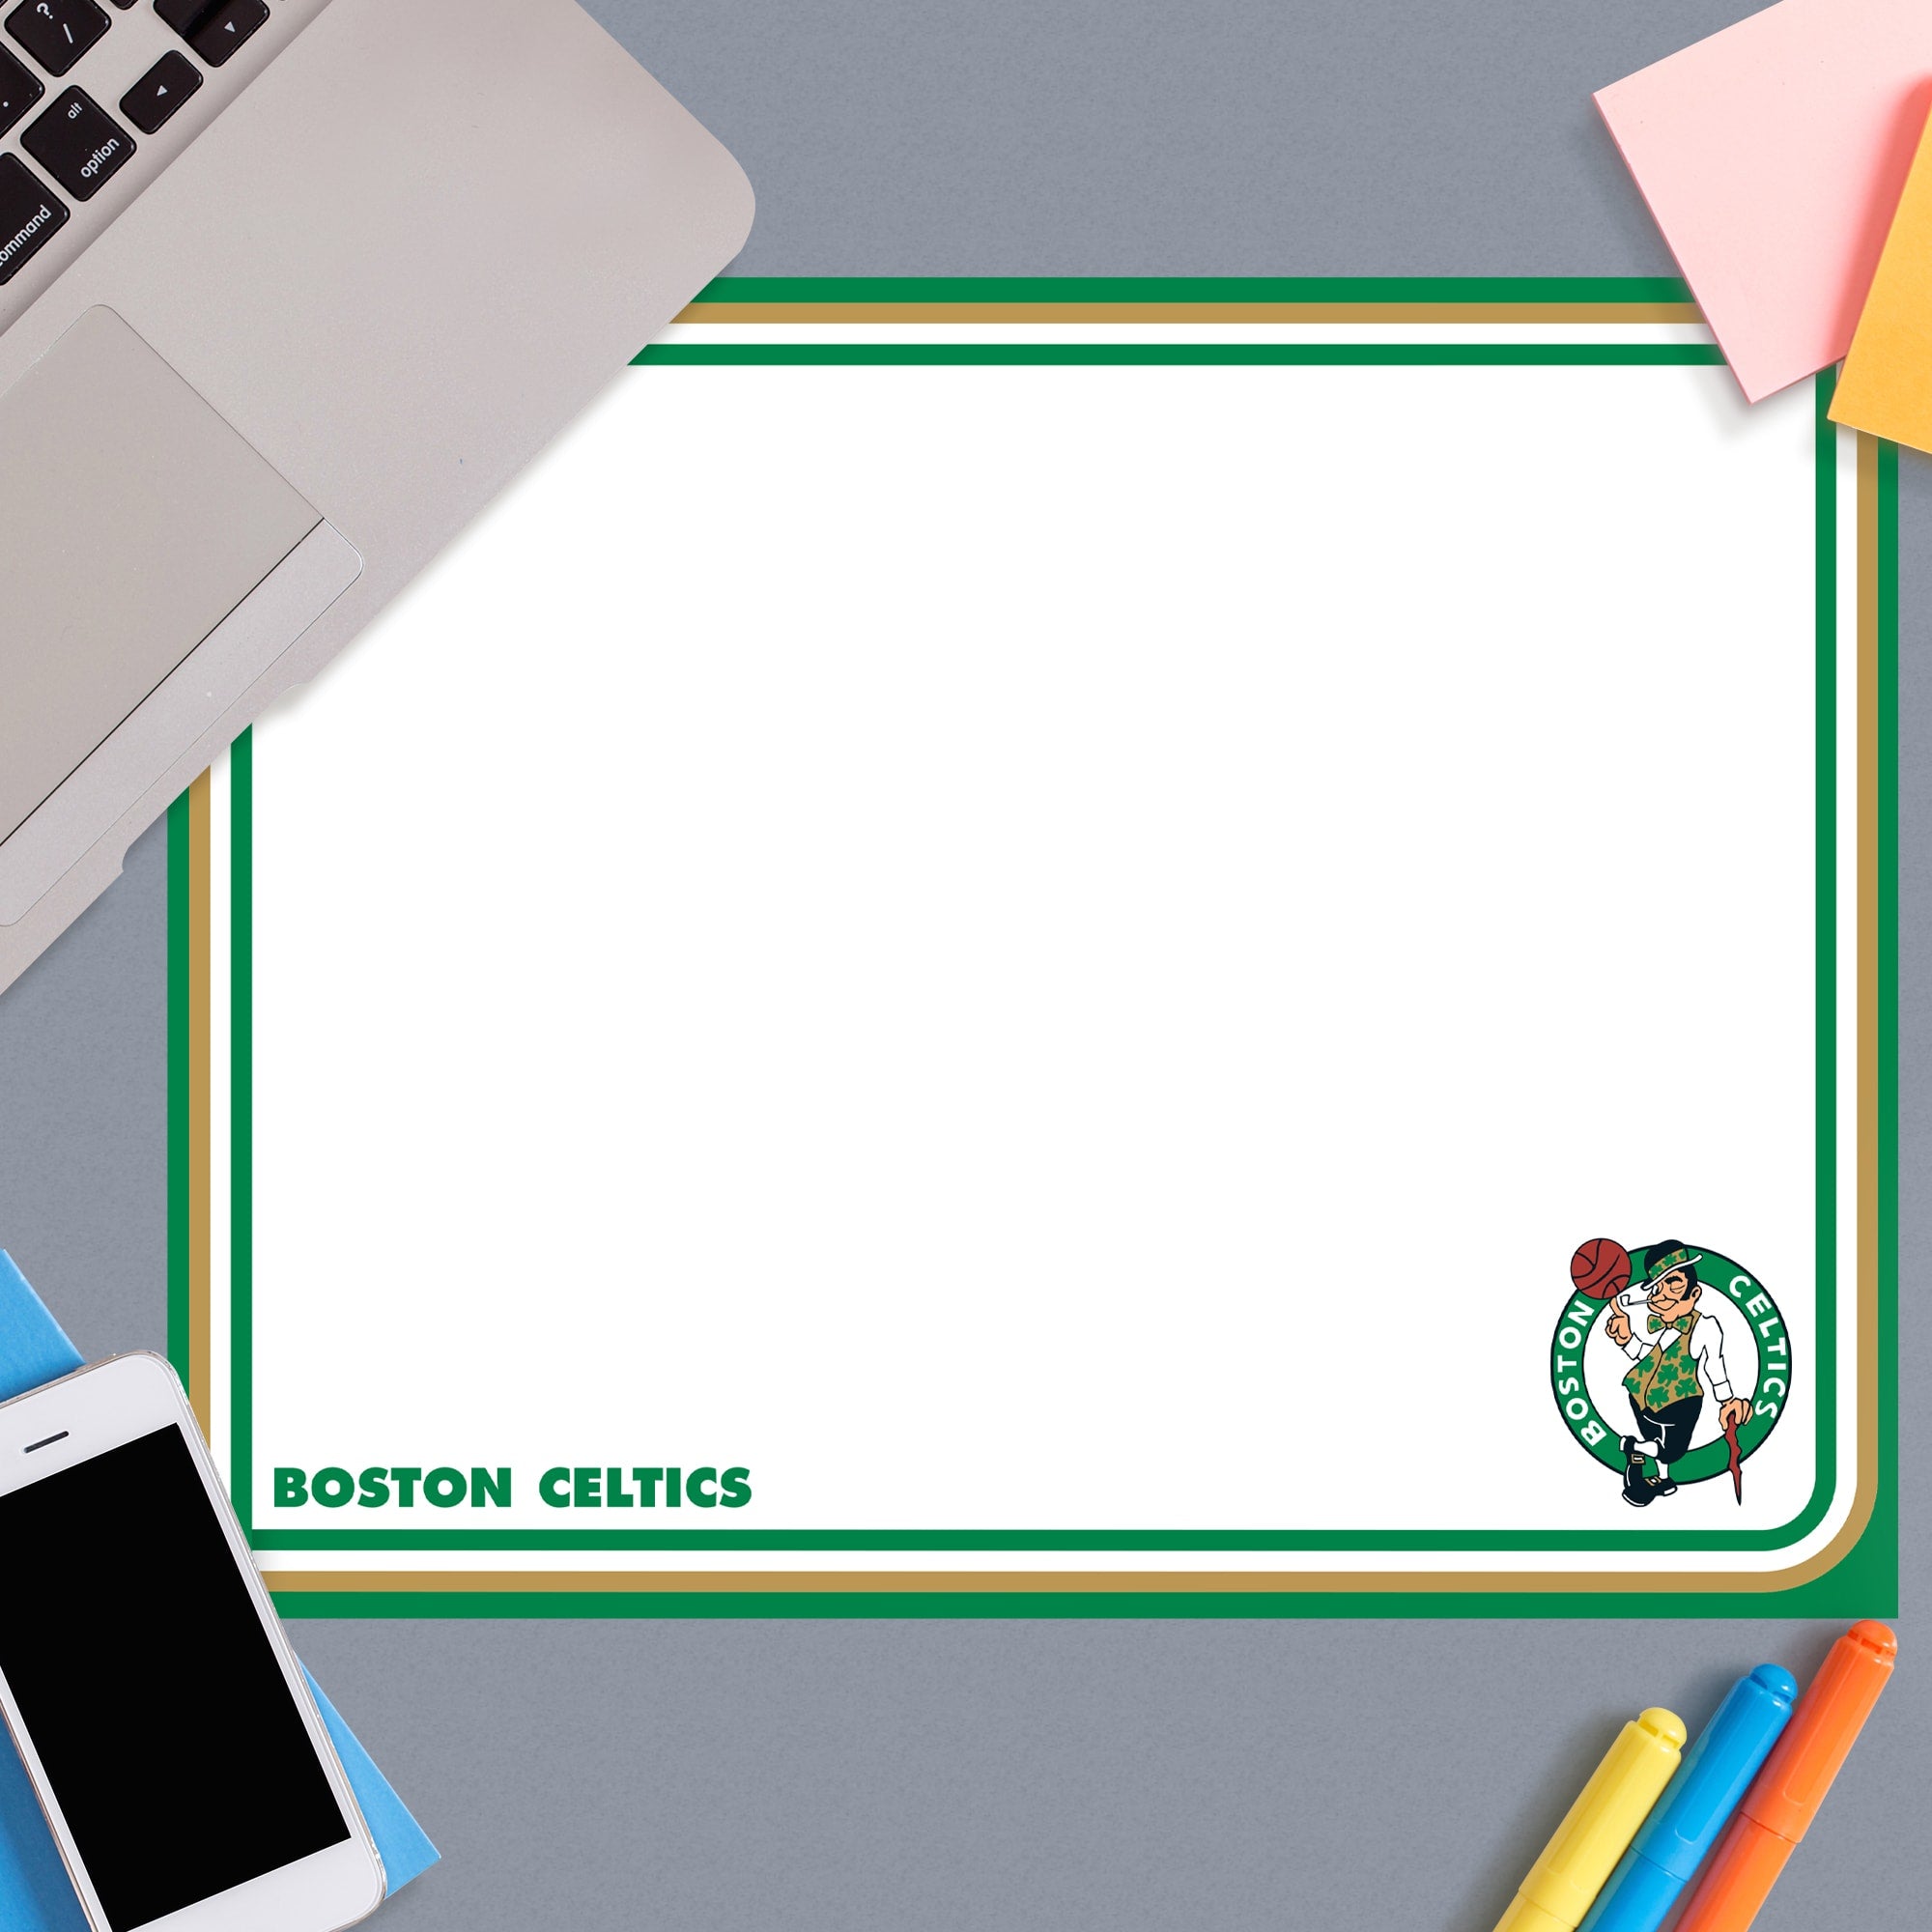 Boston Celtics for Boston Celtics: Dry Erase Whiteboard - Officially Licensed NBA Removable Wall Decal Large by Fathead | Vinyl